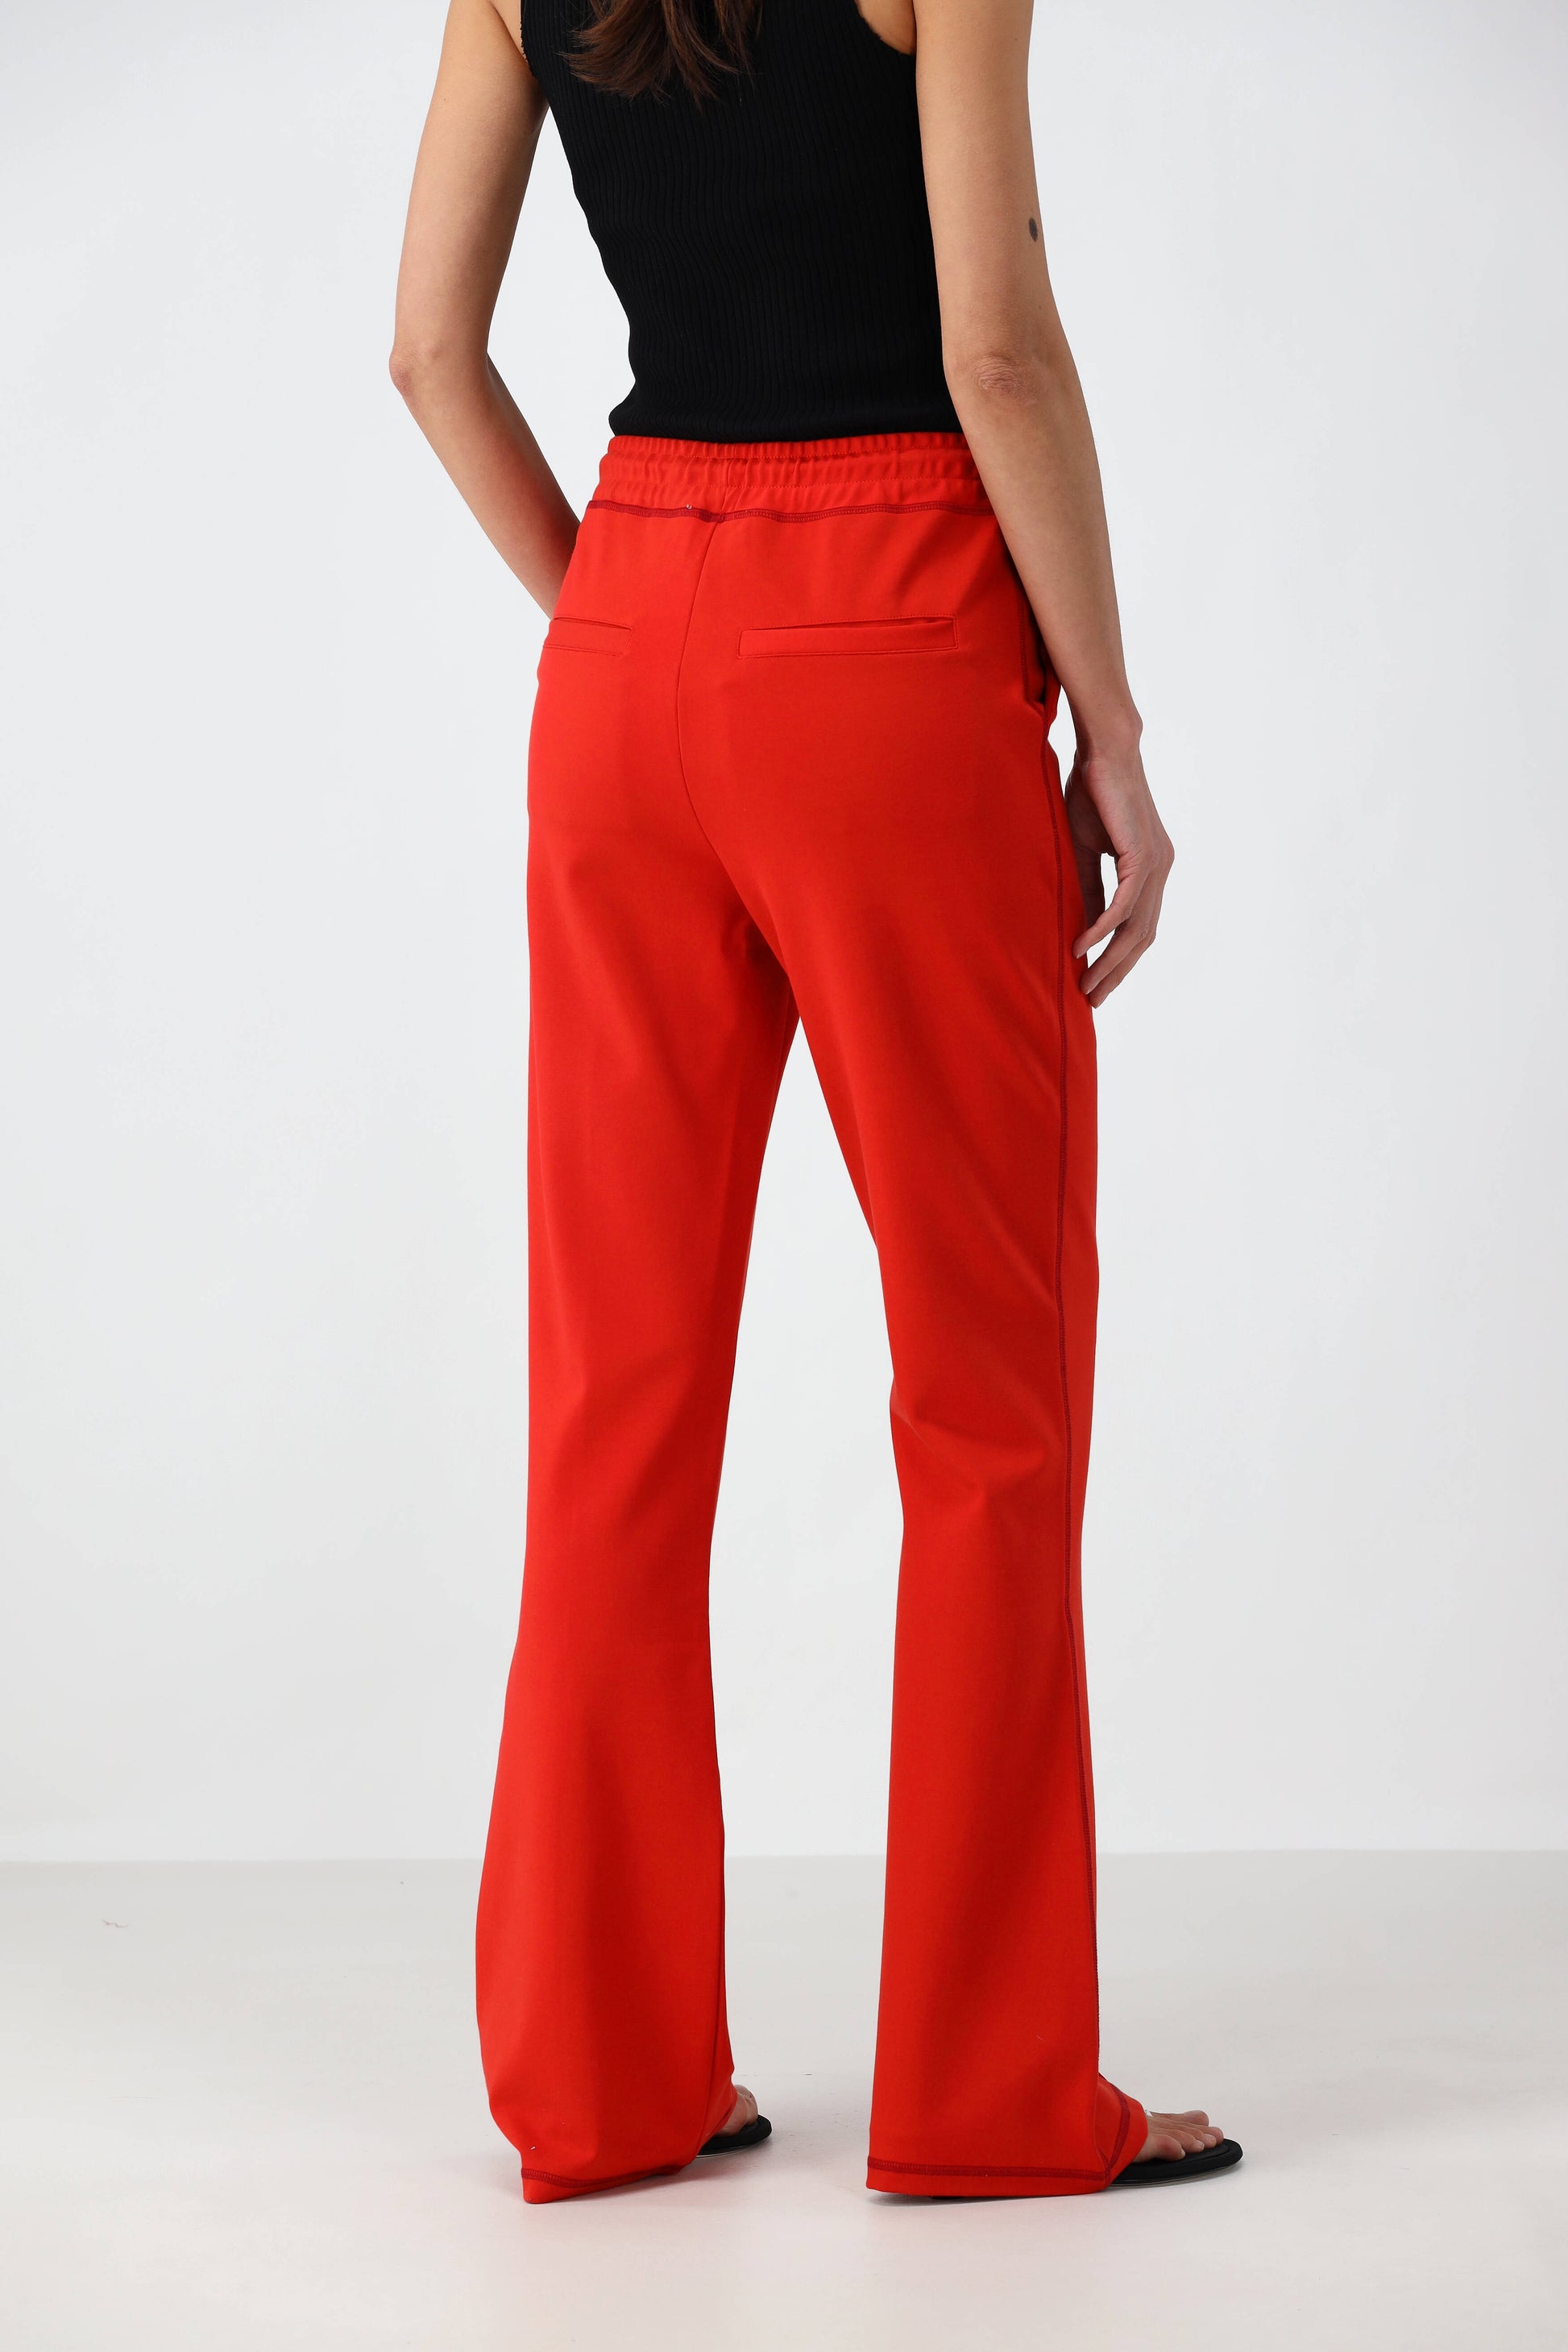 Trackpants Slim Flare in RotJW Anderson - Anita Hass